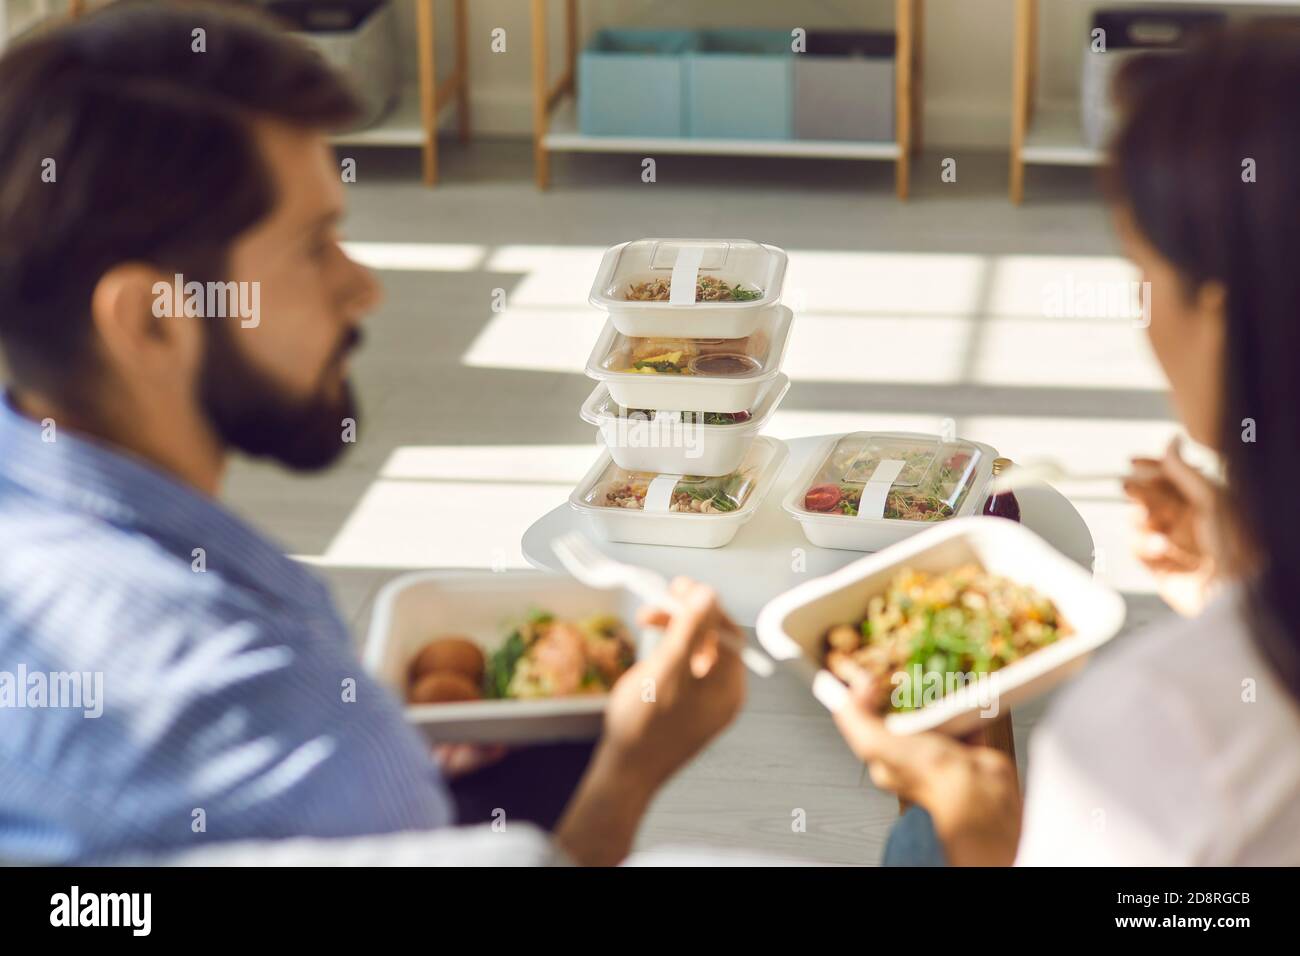 People eating healthy food from containers and discussing set of meals delivered for the whole day Stock Photo